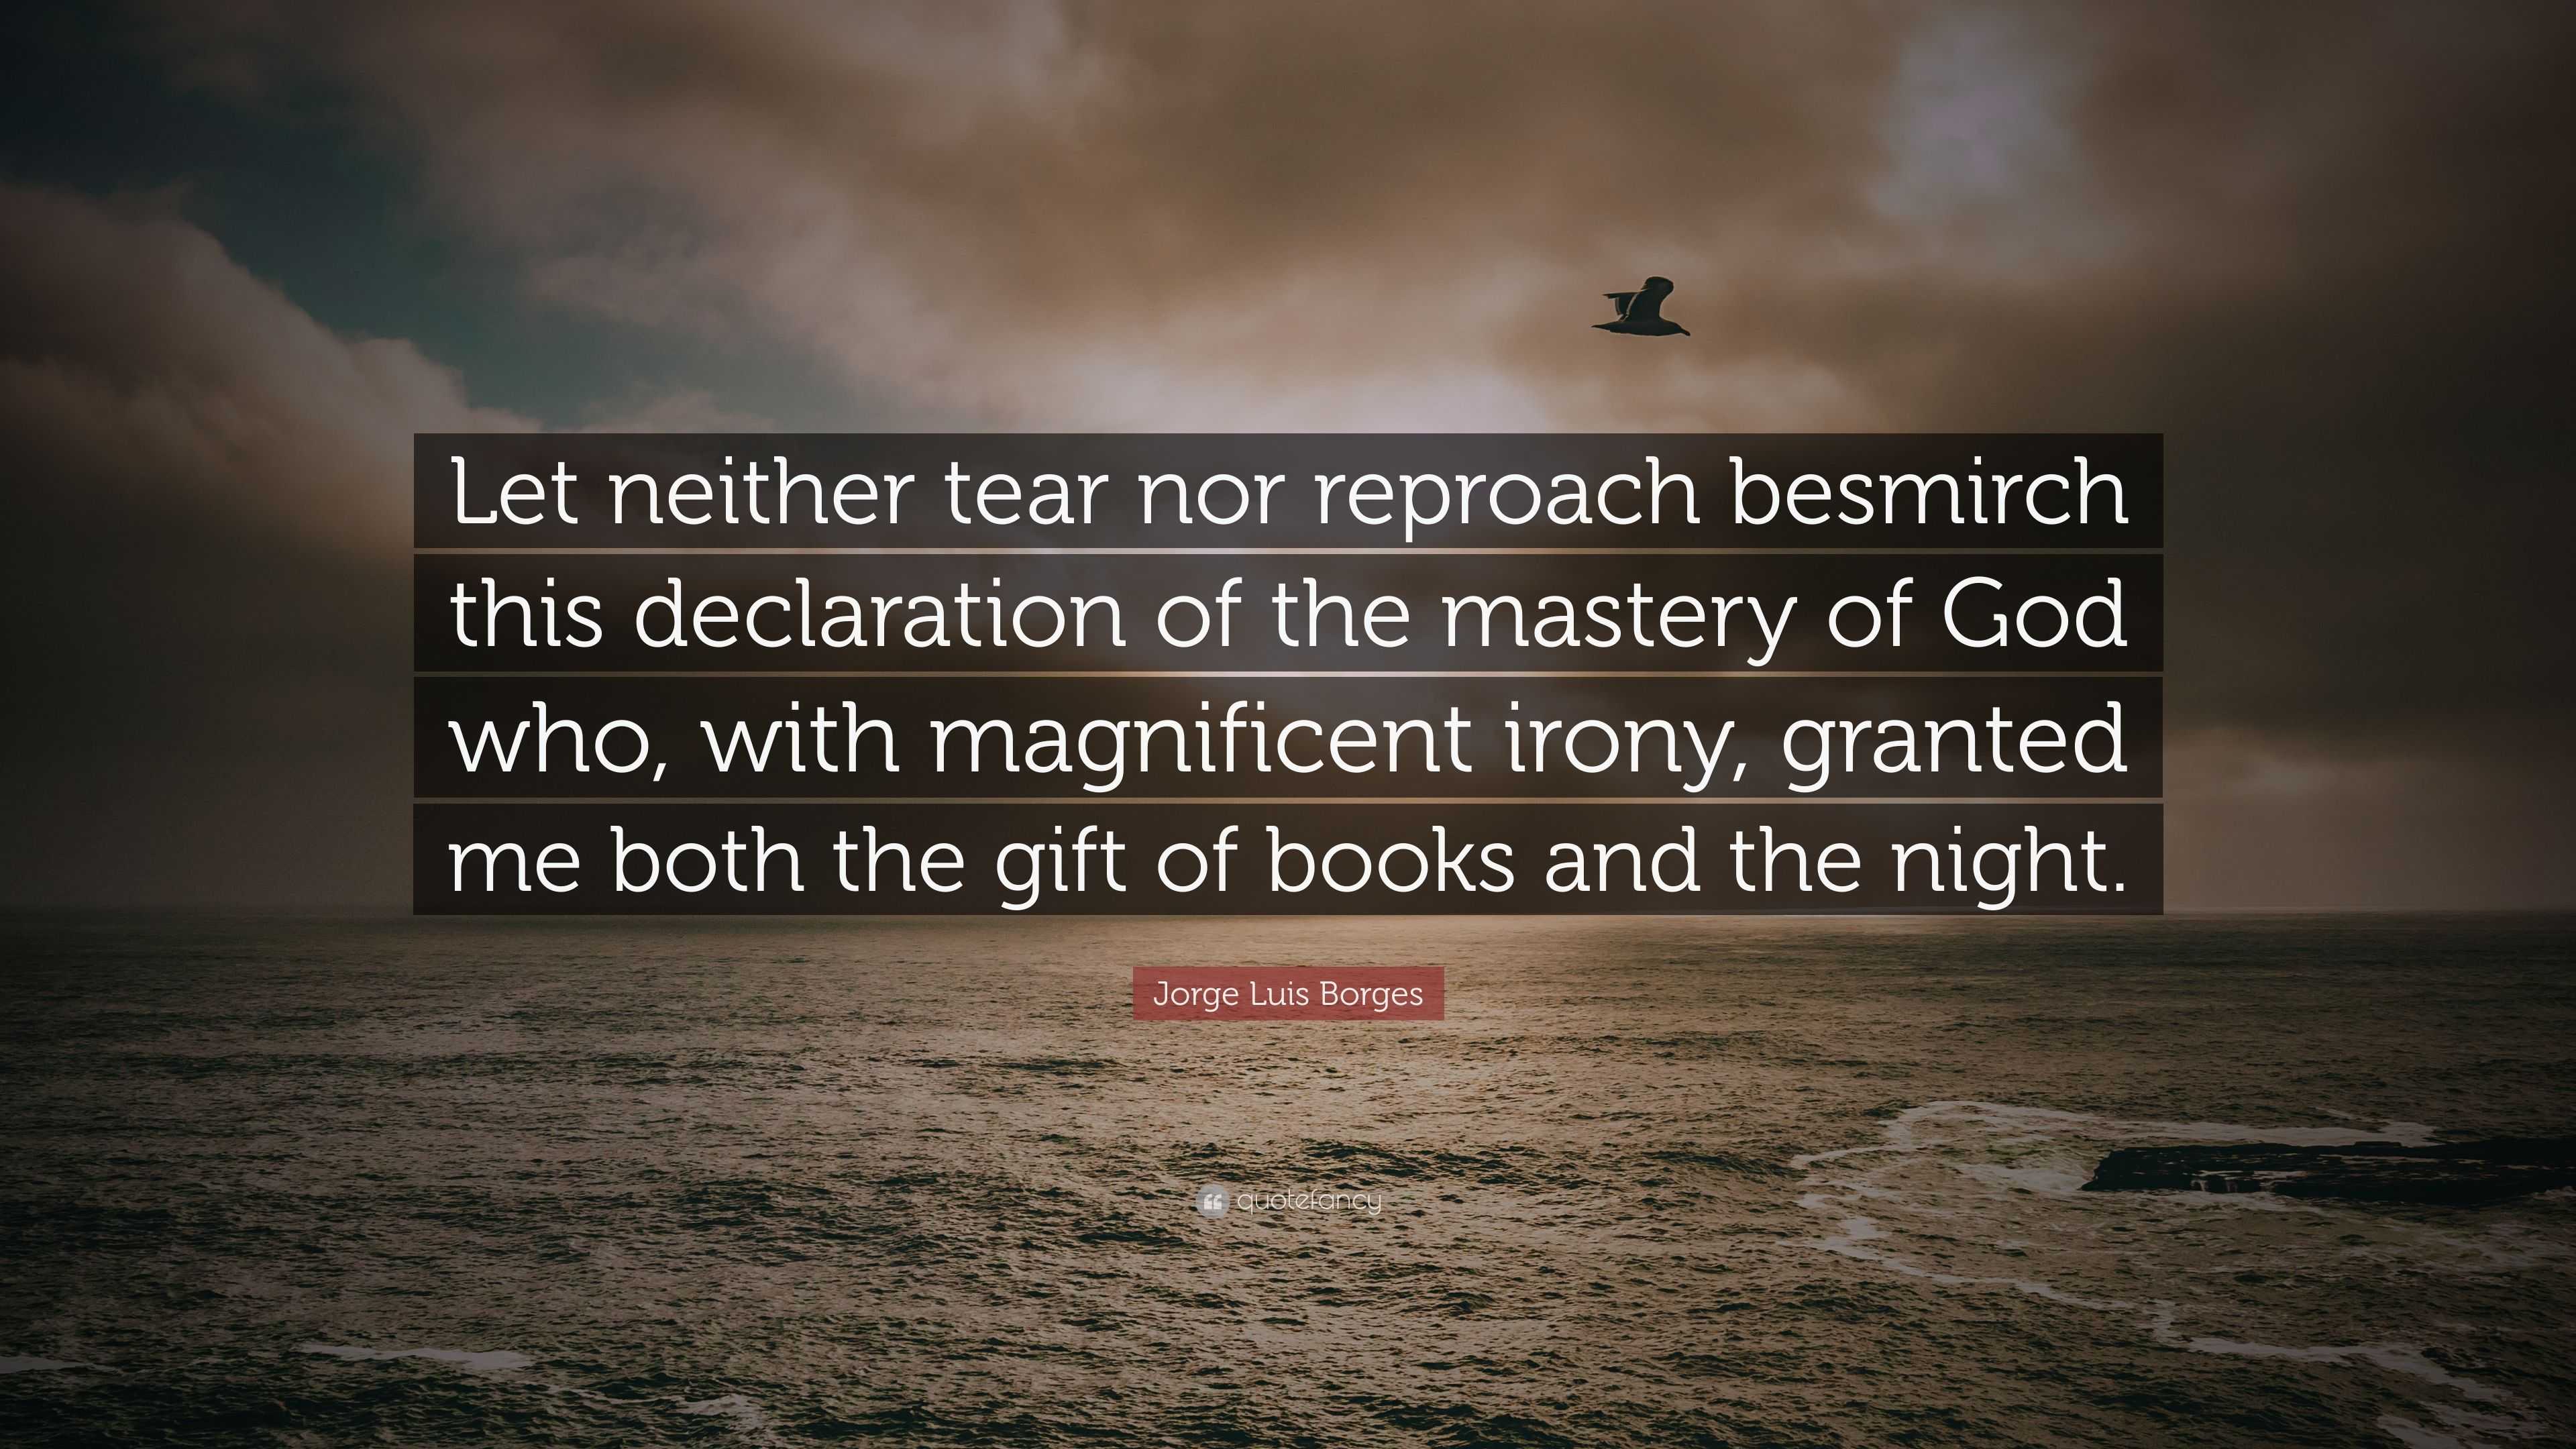 Jorge Luis Borges Quote: “Let neither tear nor reproach besmirch